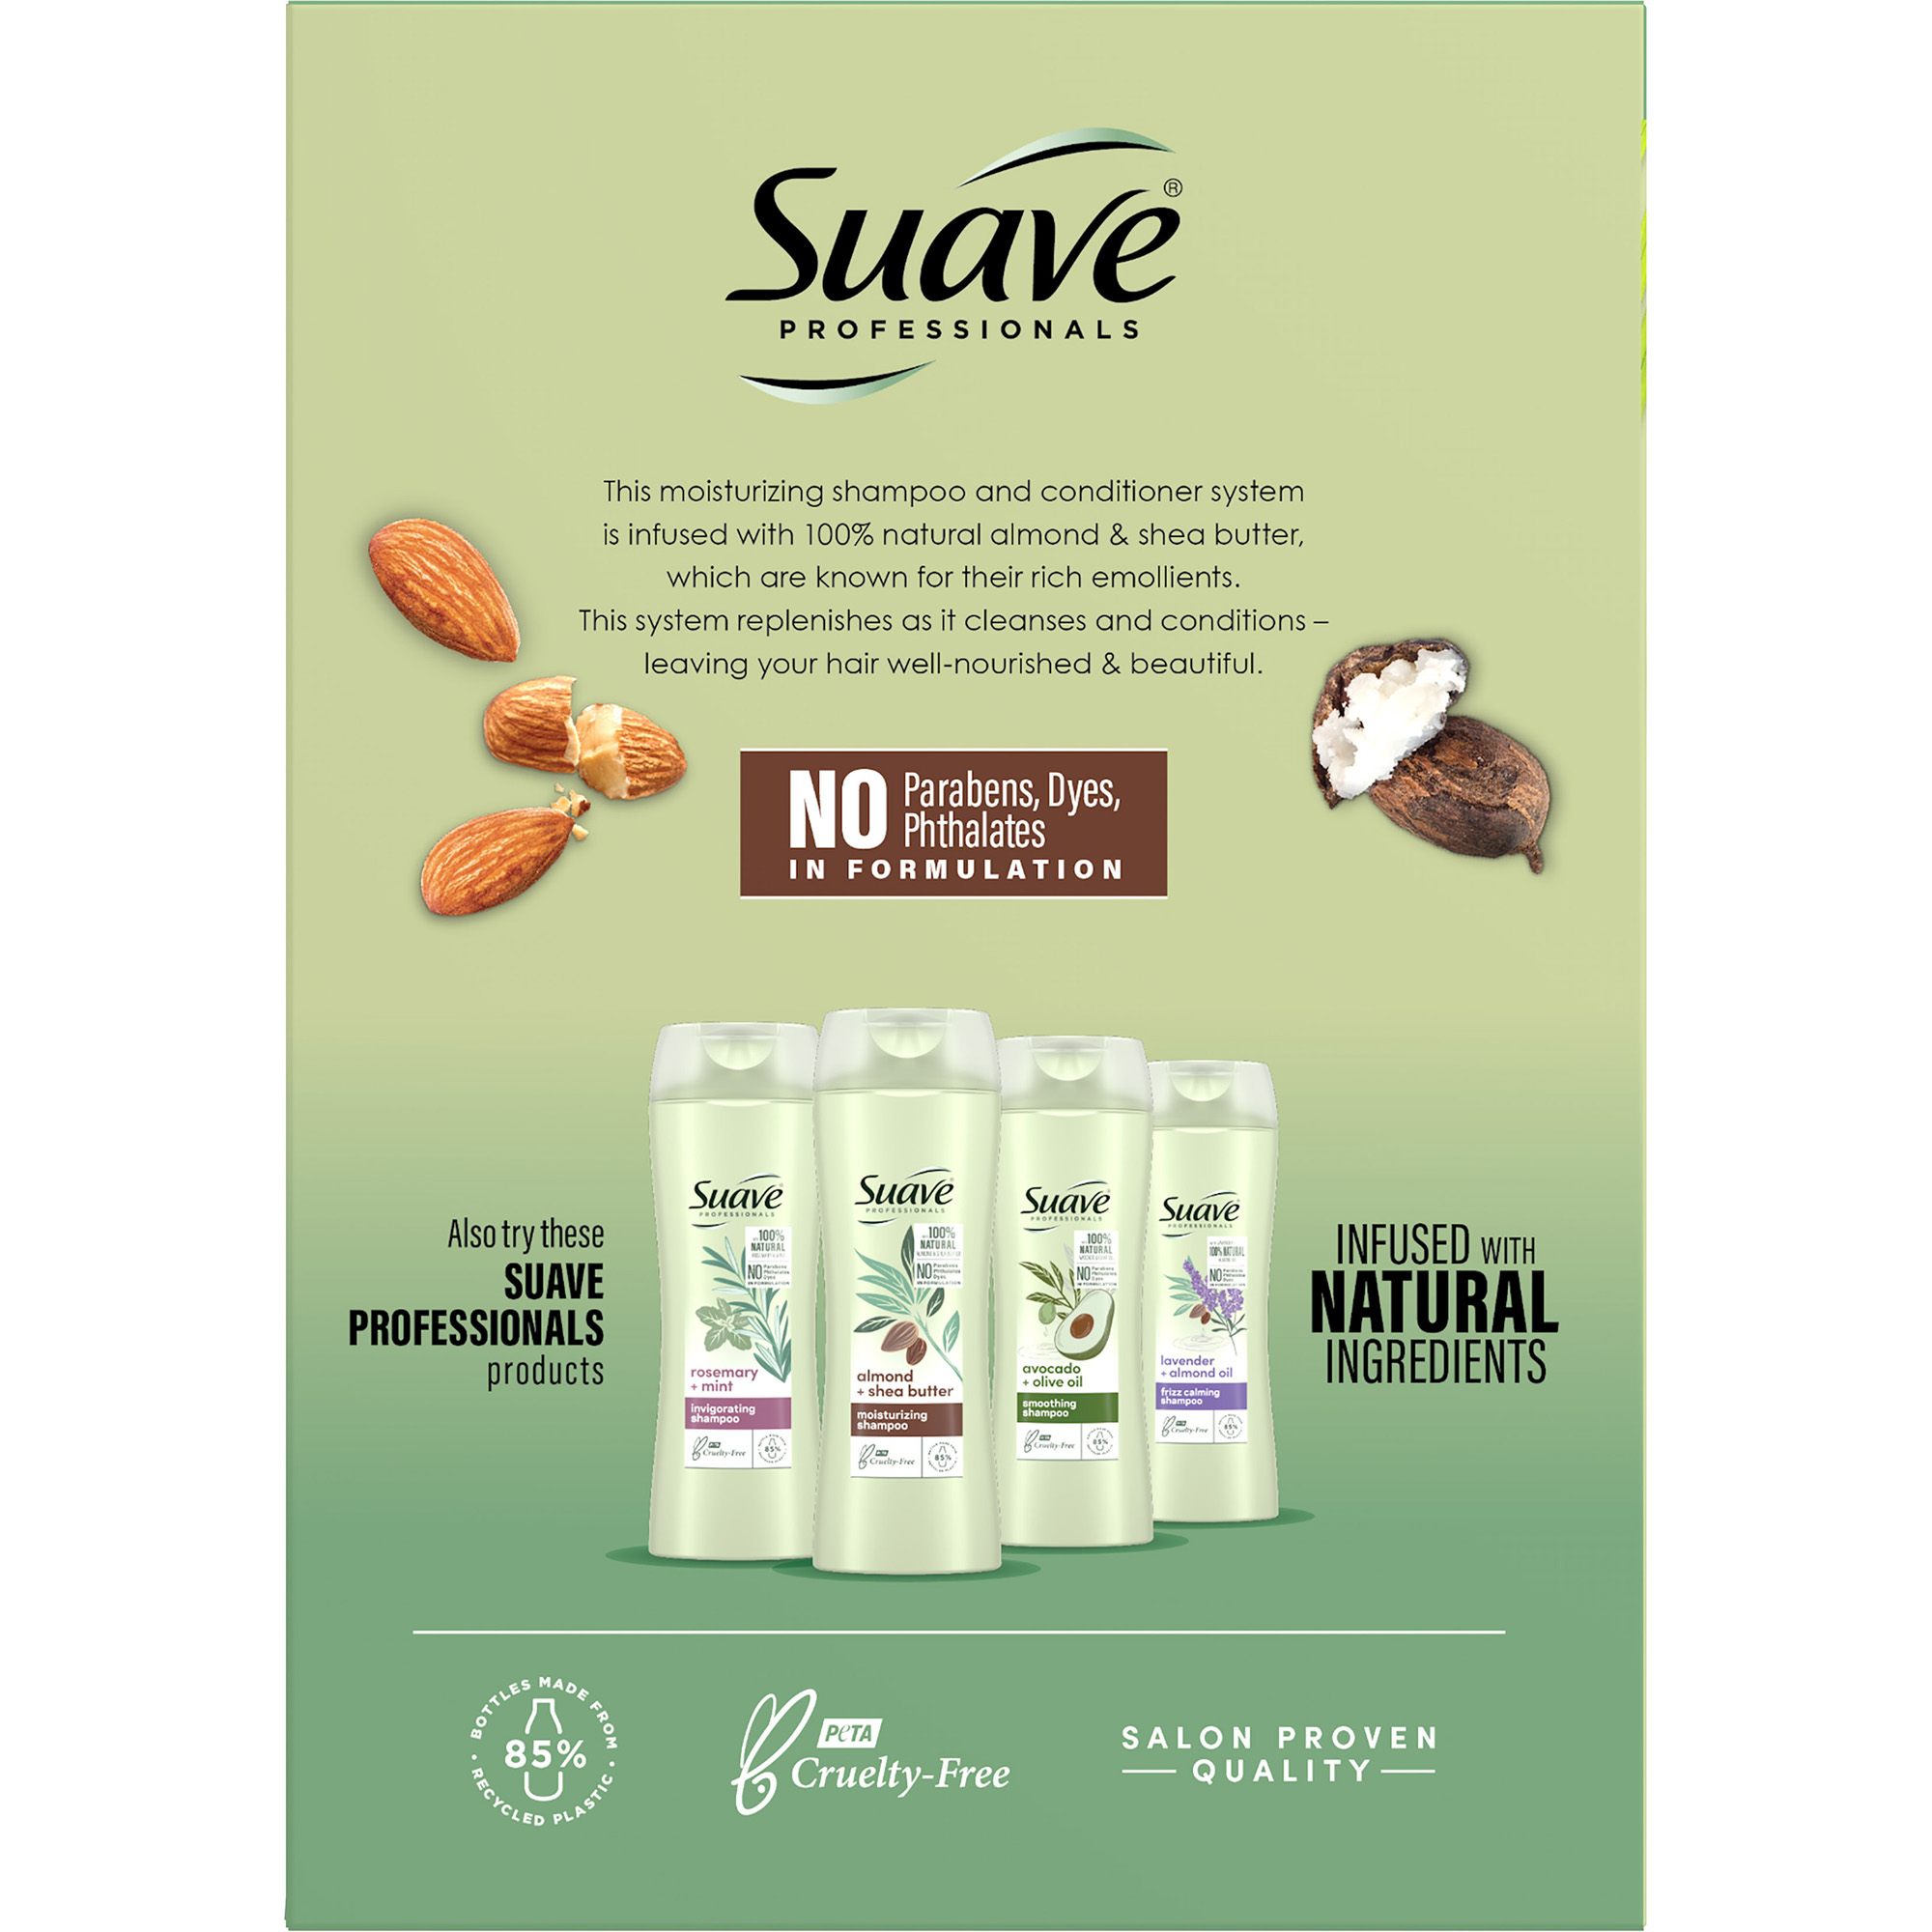 Suave Professionals Moisturizing Shampoo and Conditioner Set, Almond & Shea Butter, 28 fl oz, 2 Pack - image 3 of 13